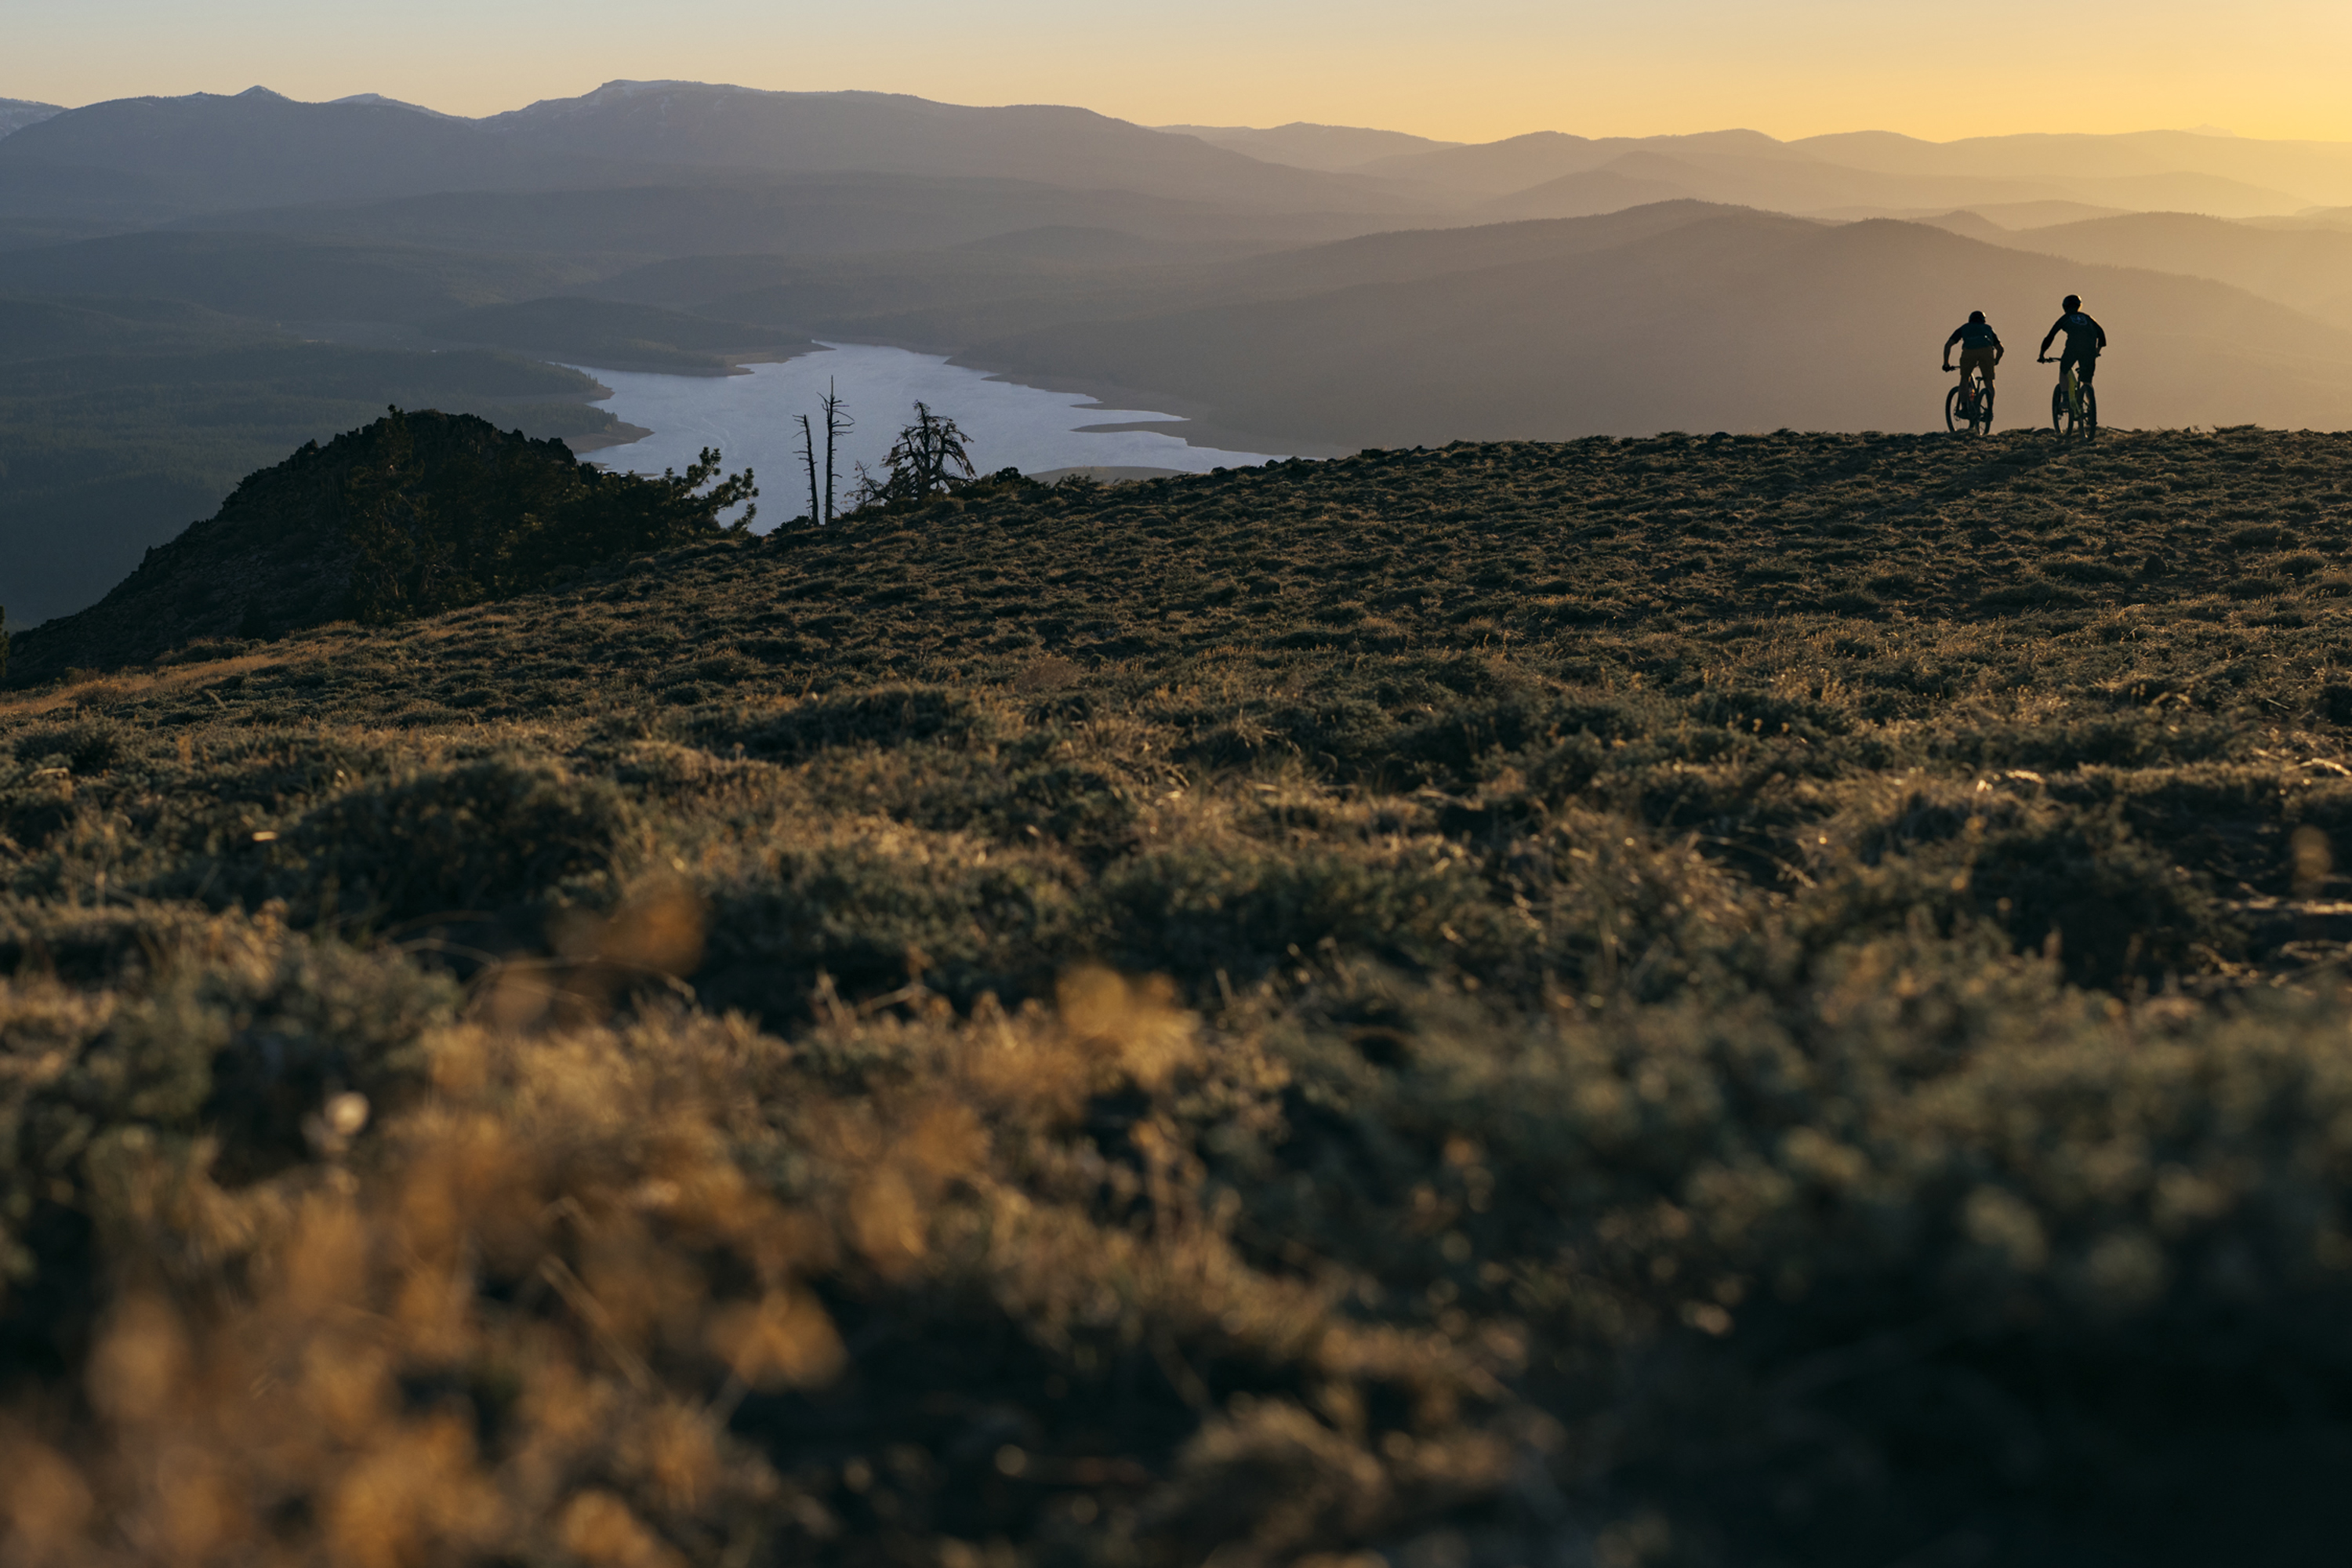 Riding EMTB's off into the sunset